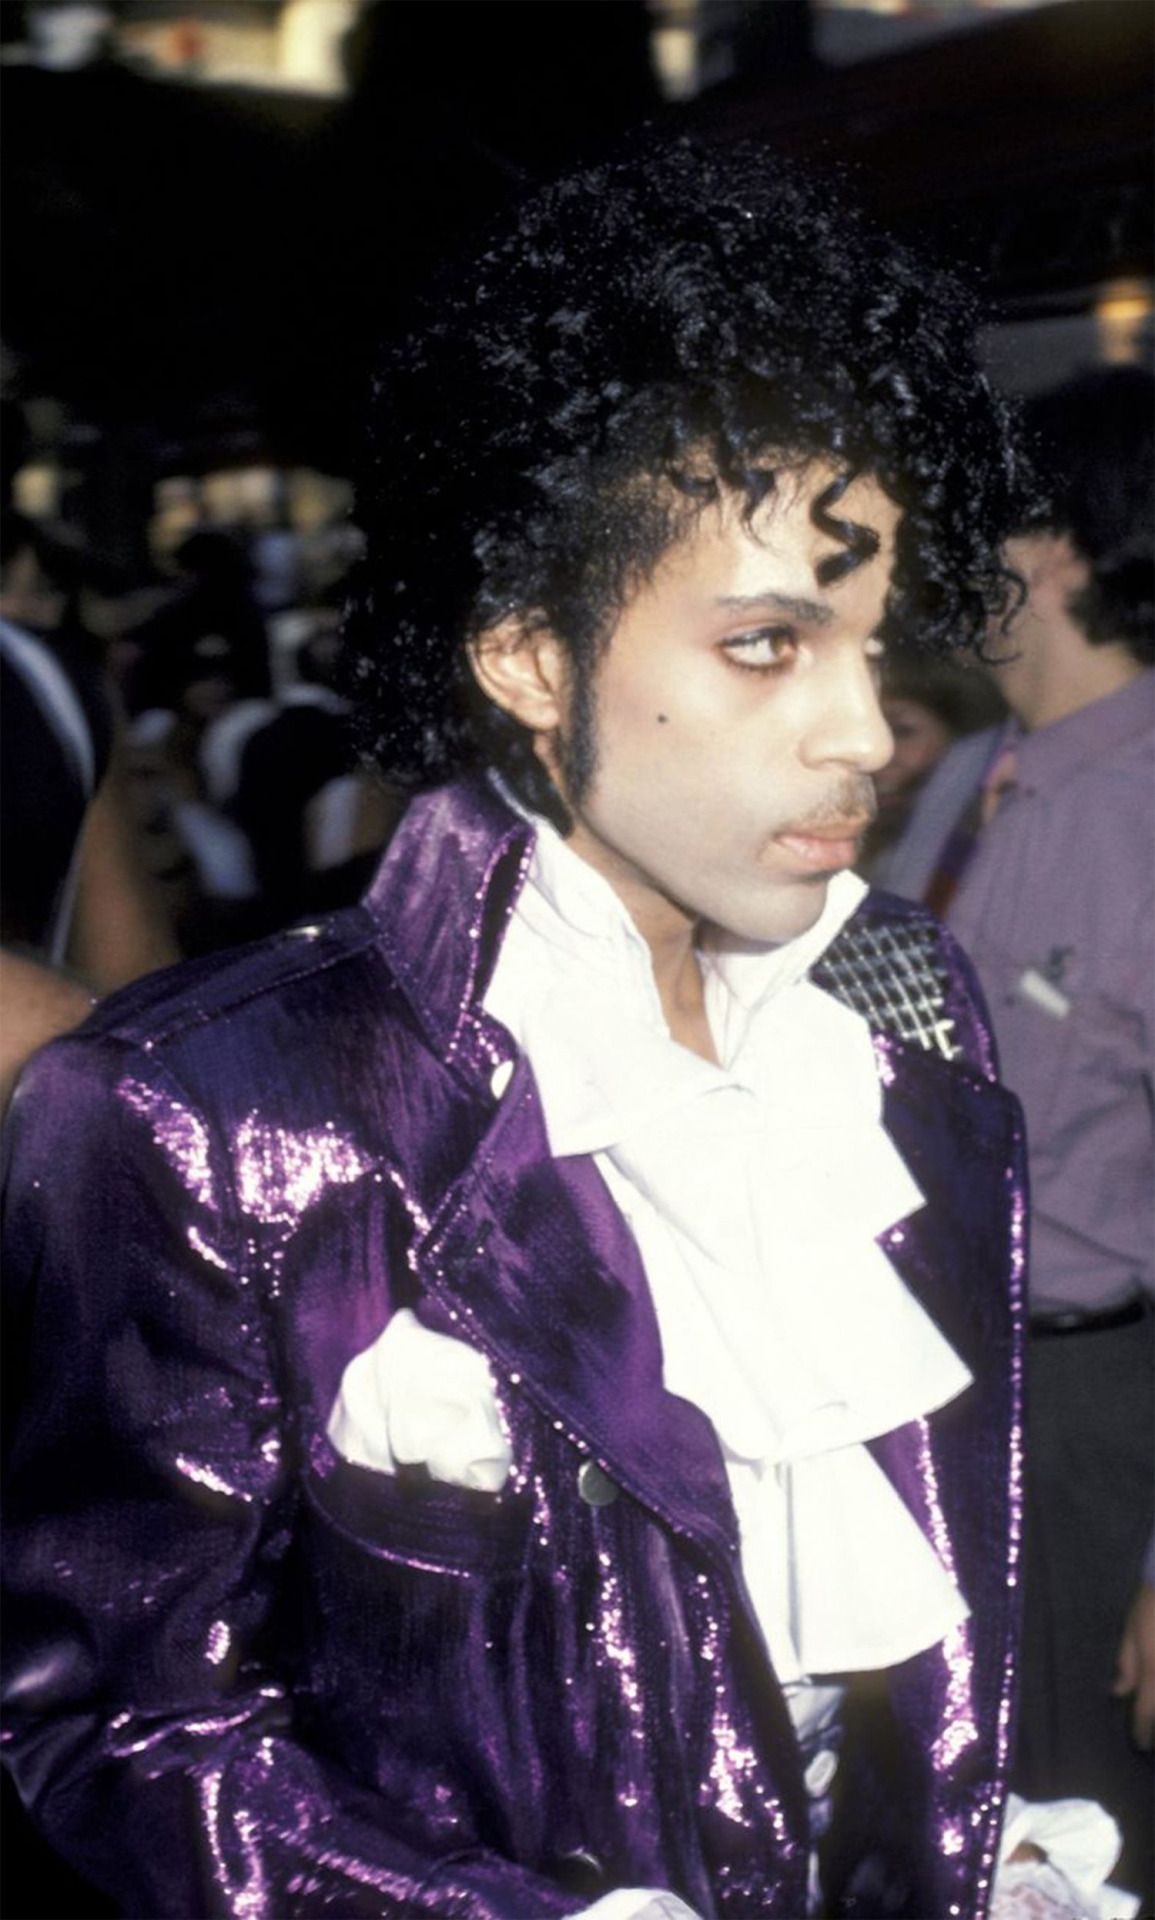 Prince Rogers Nelson Photo. Prince musician, Handsome prince, Prince rogers nelson